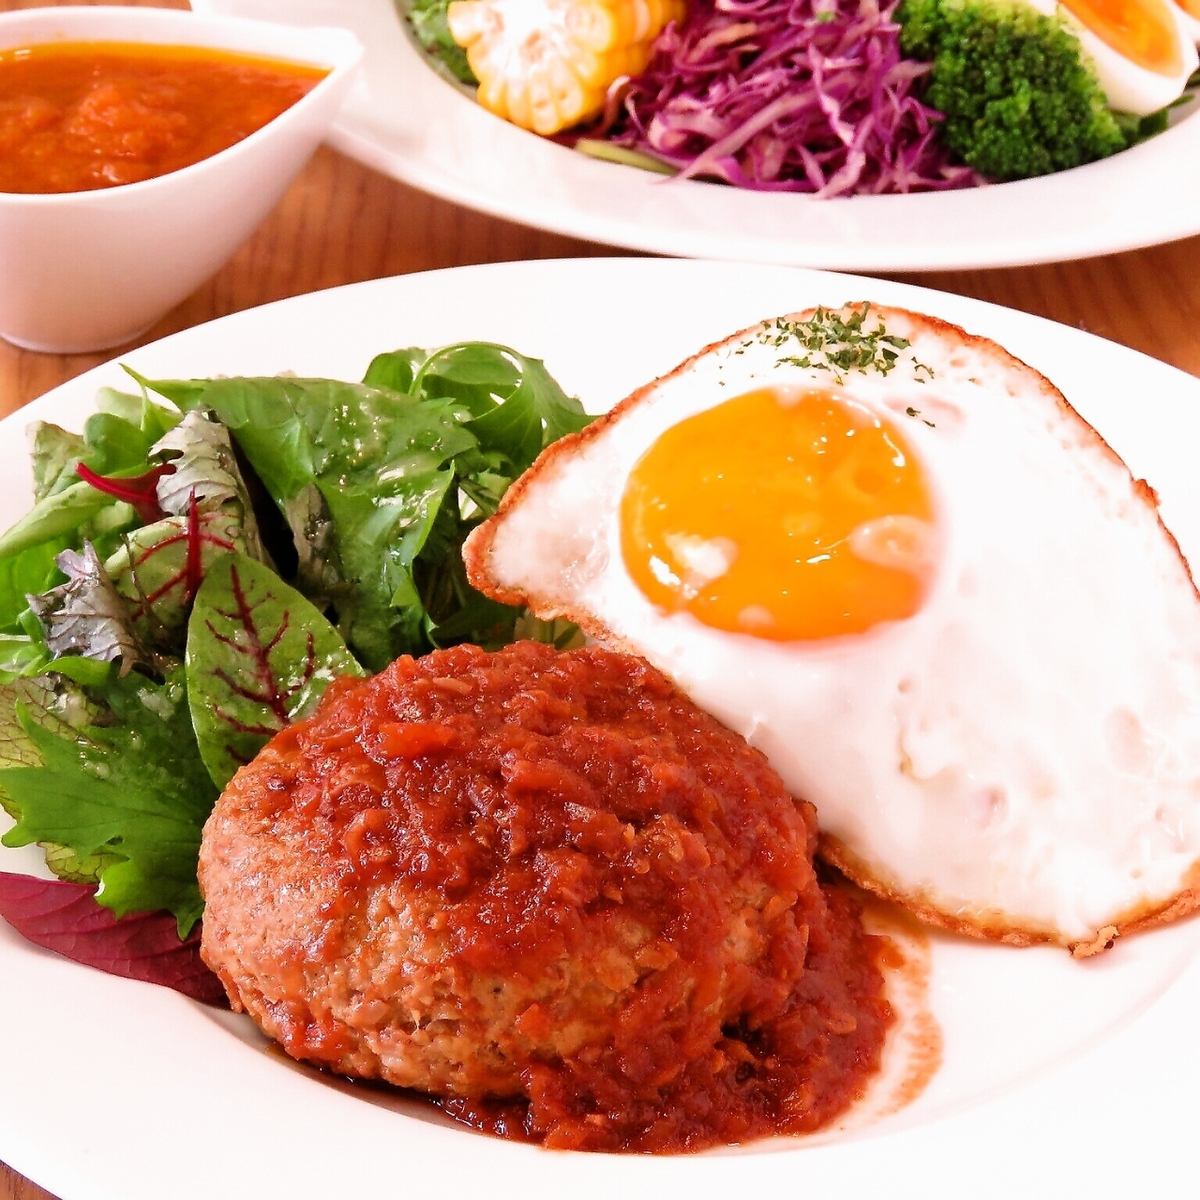 You can enjoy Vegeppo set meals and SP lunches made with carefully selected ingredients.